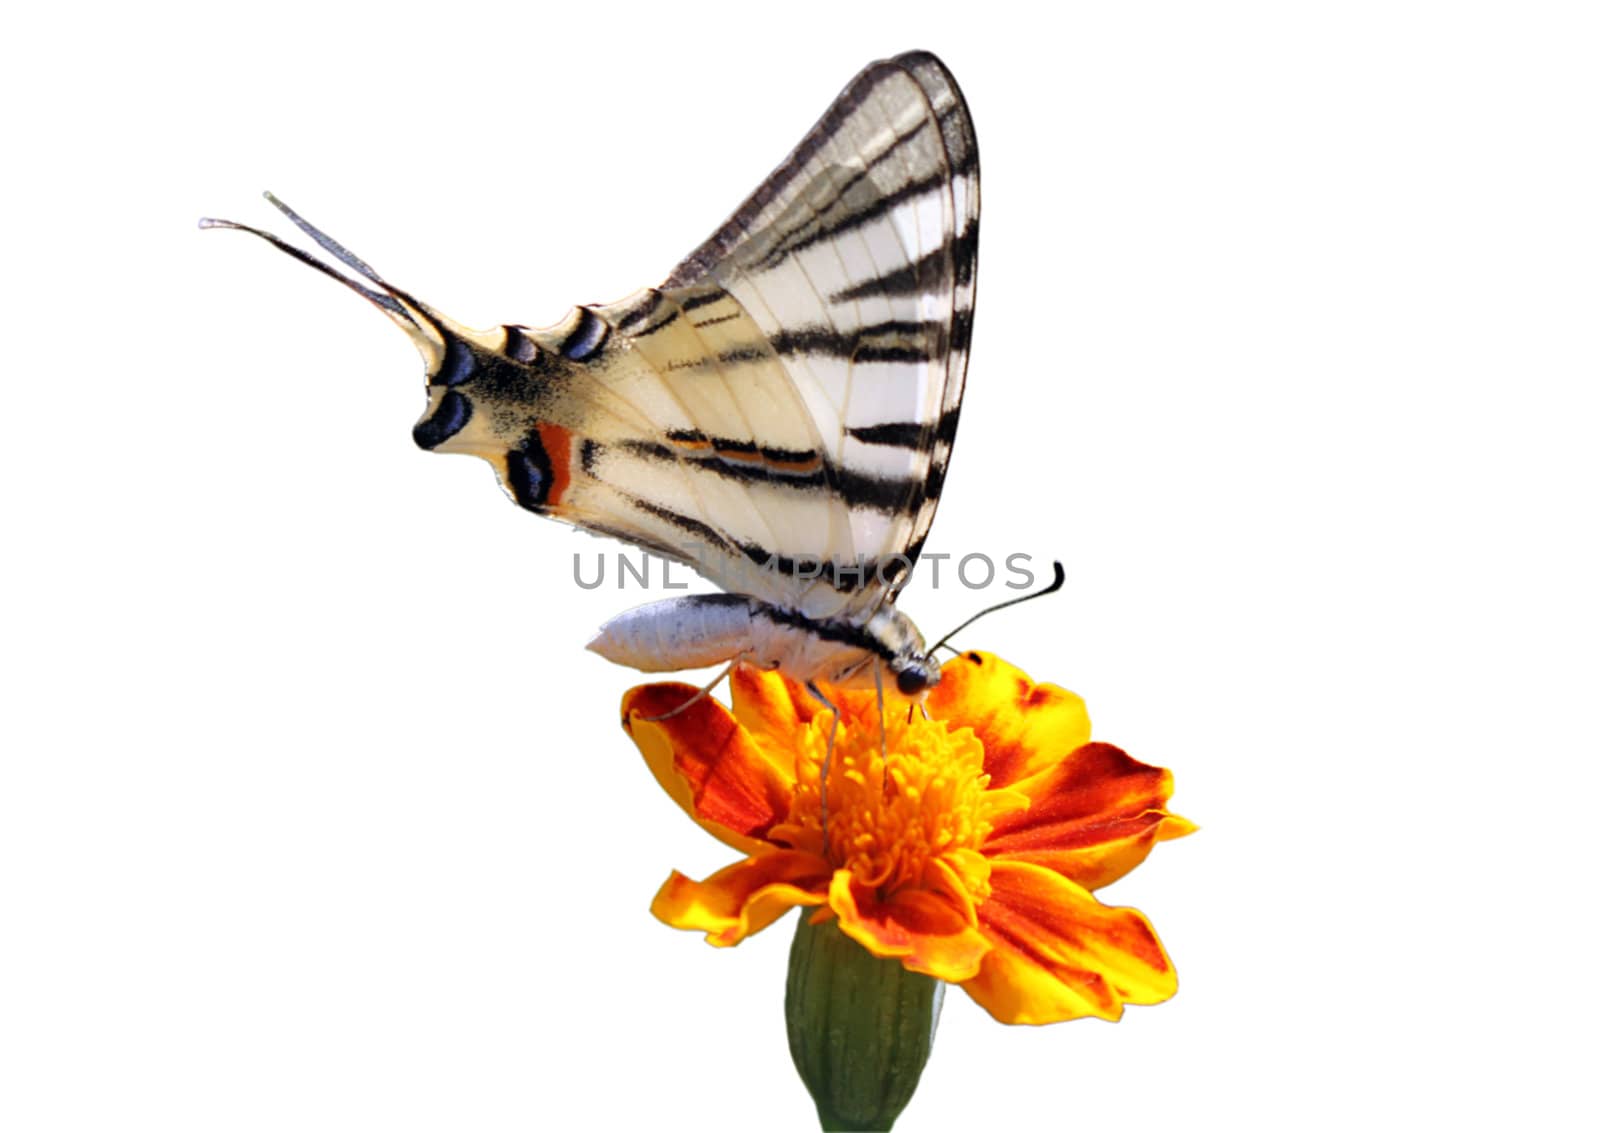 butterfly (Scarce Swallowtail) sitting on flower (marigold) isolated on white